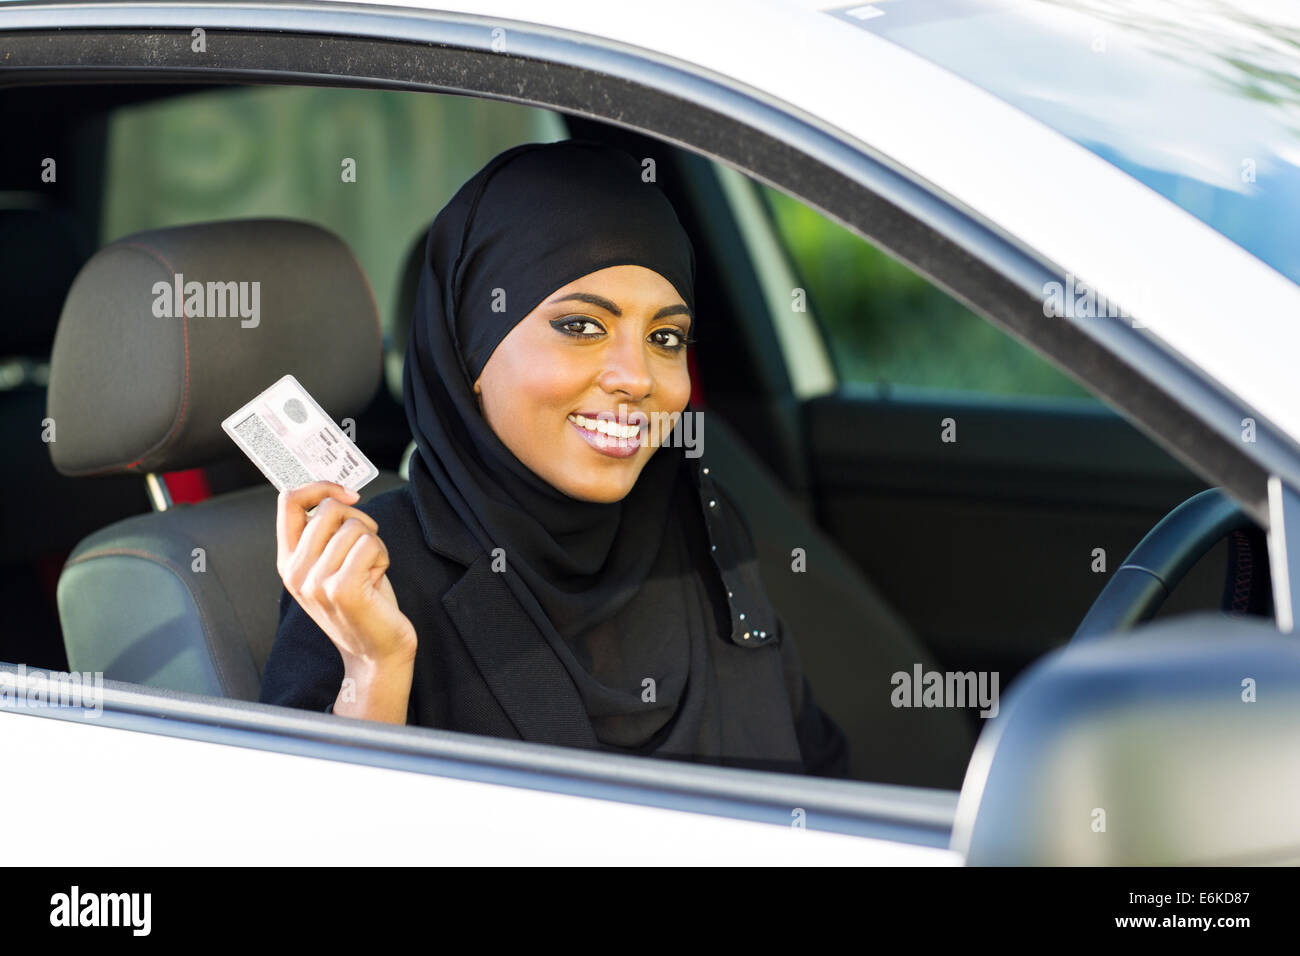 cheerful Muslim woman showing a driving license she just got Stock Photo